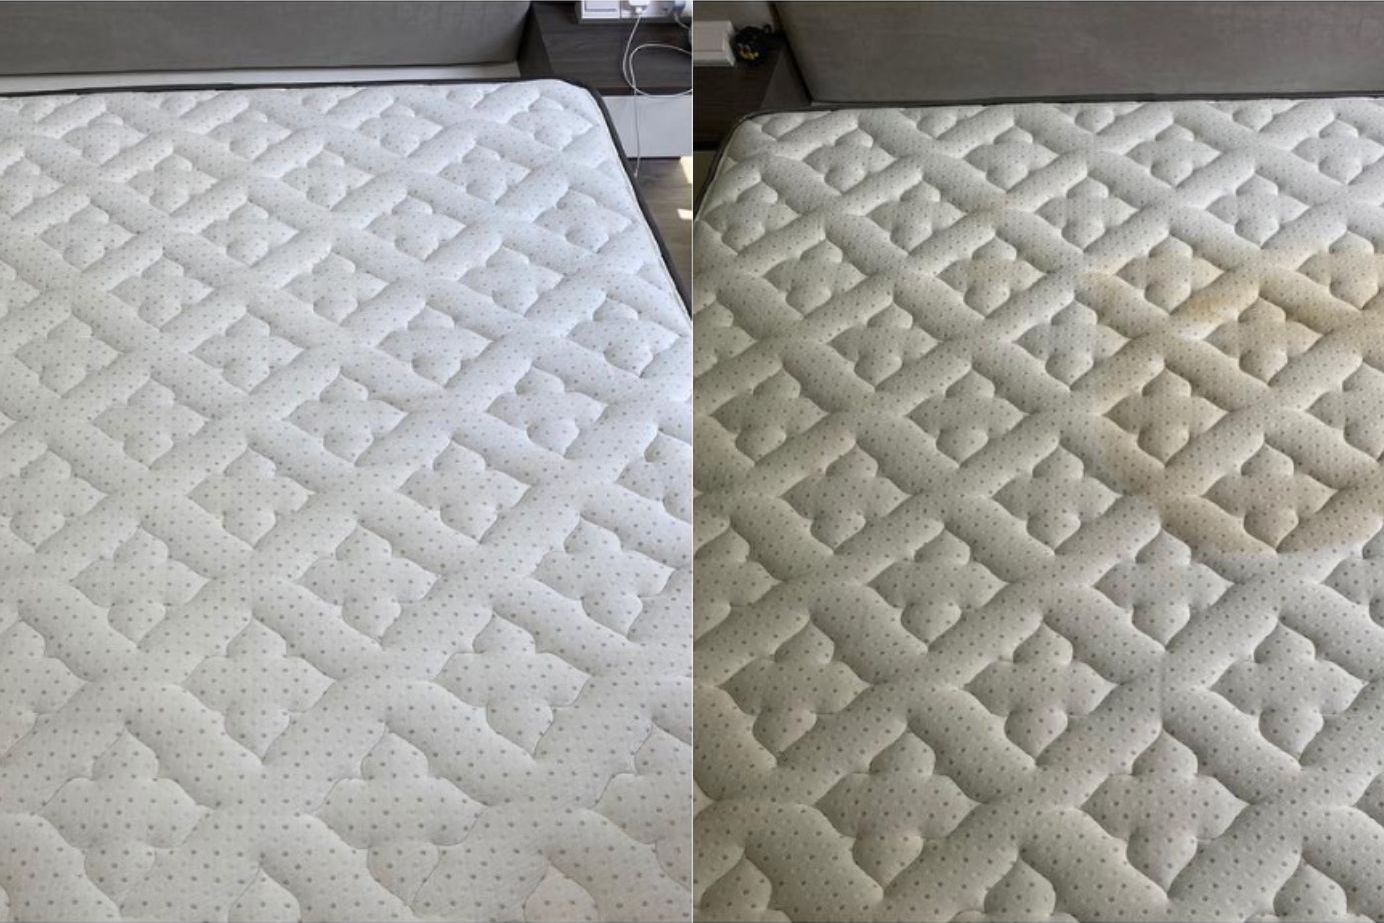 Mattress Cleaning Service Image